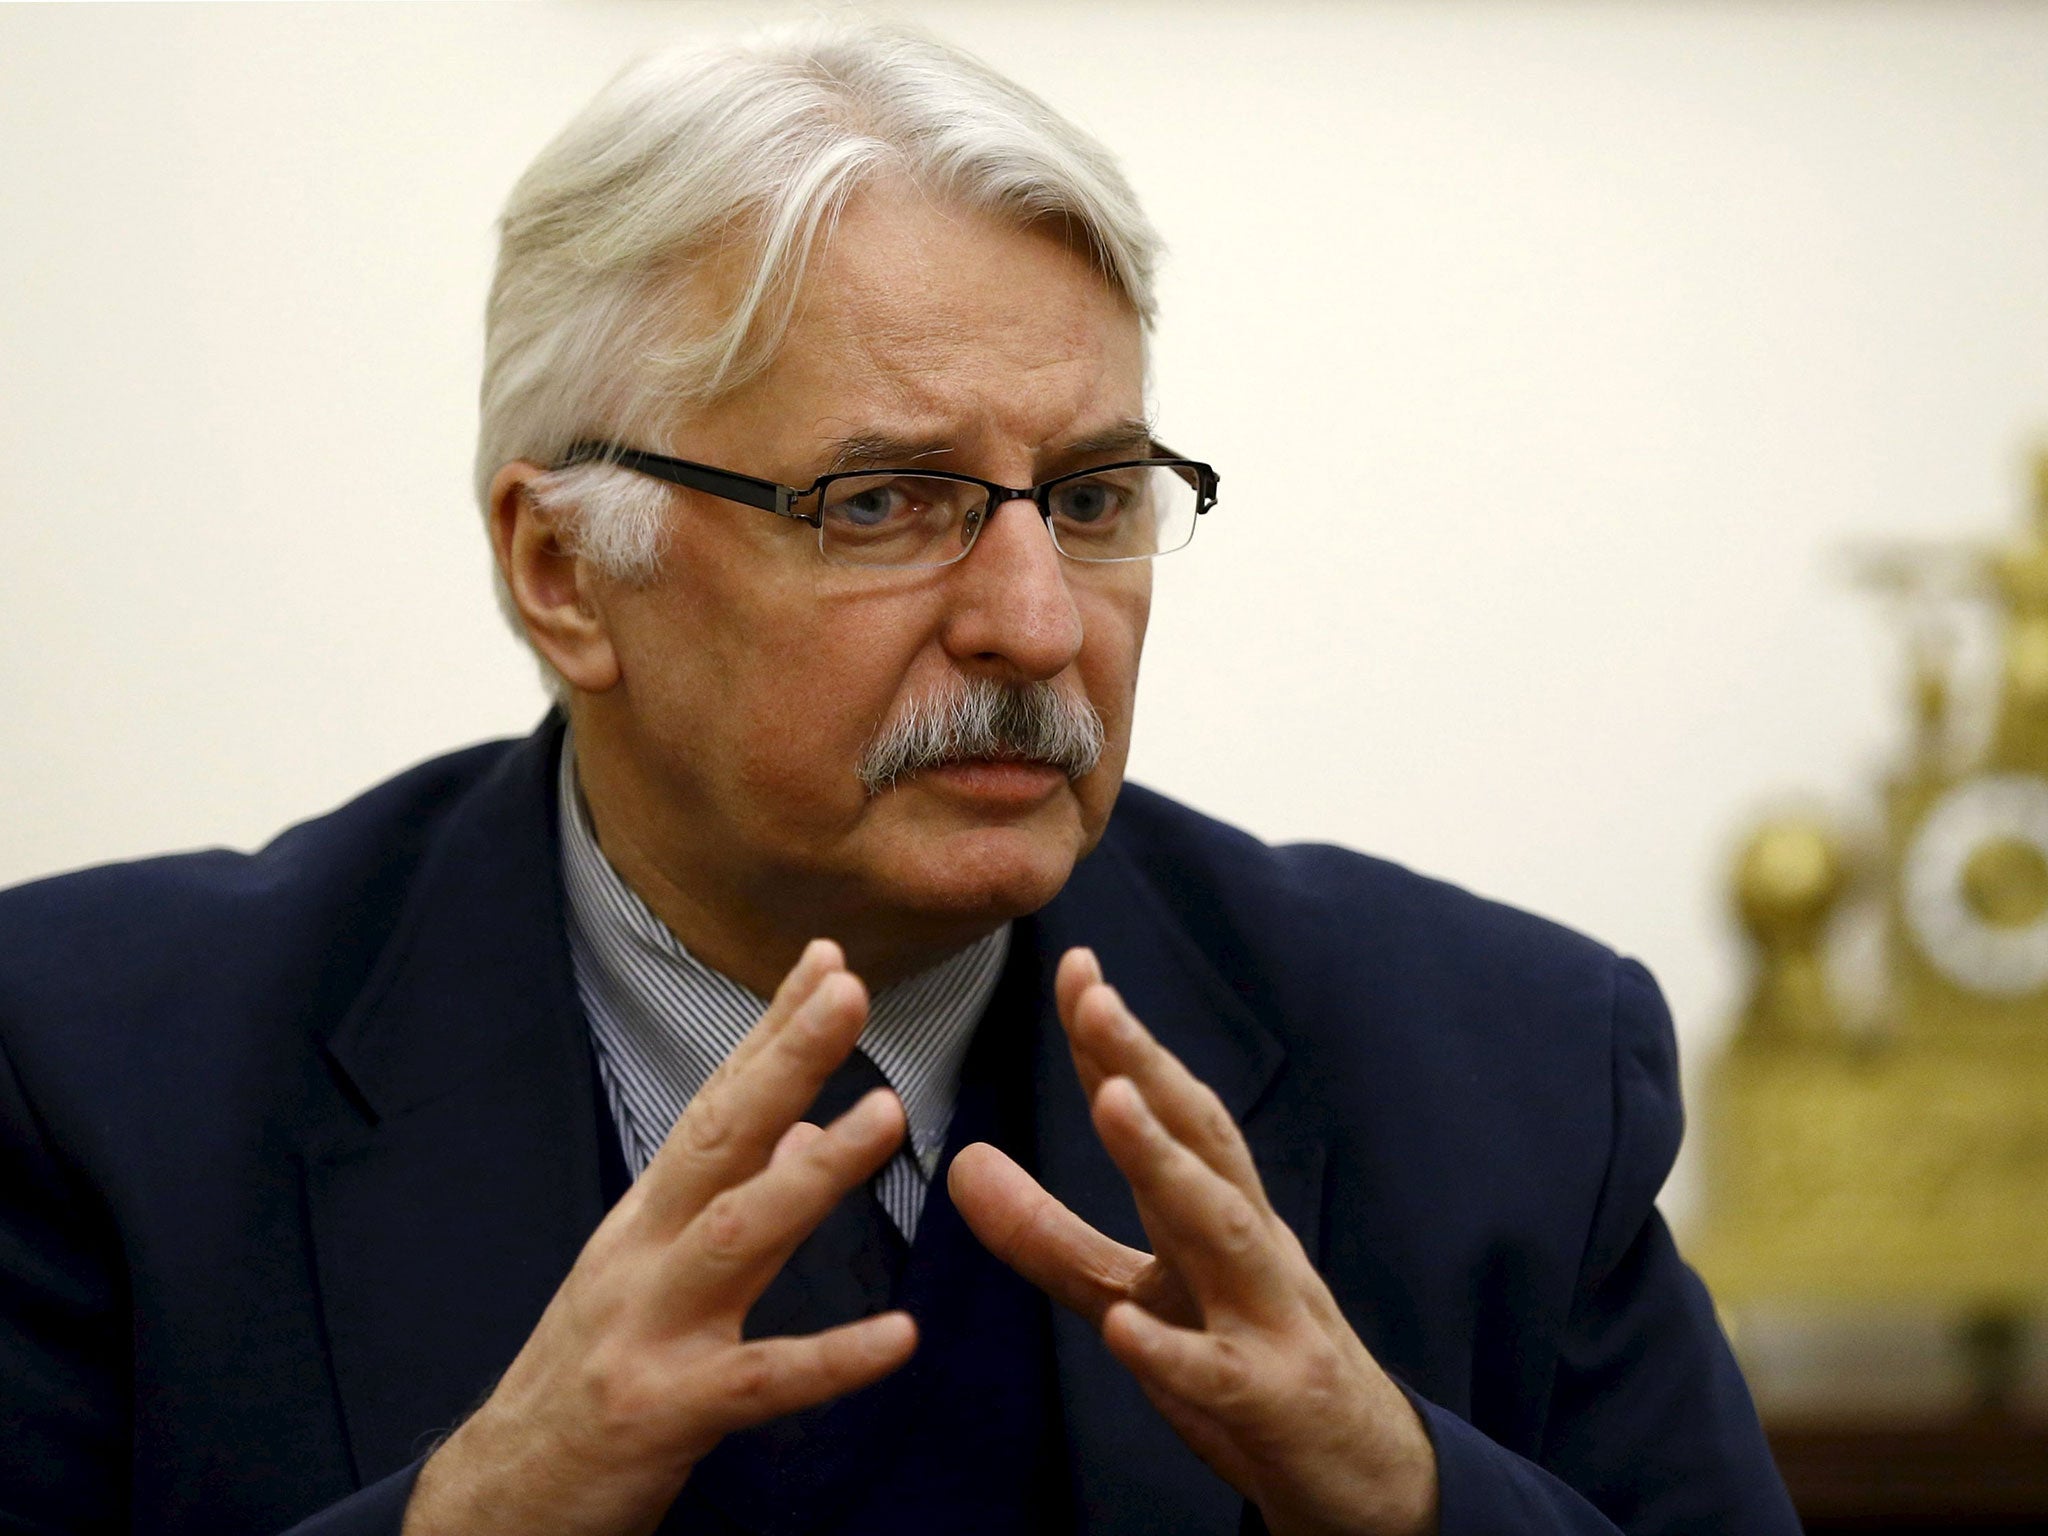 Poland's Foreign Minister Witold Waszczykowski told Reuters that Poland could be open to compromise over British demands to limit the rights of European Union migrants if London helps it bolster the NATO presence in central Europe